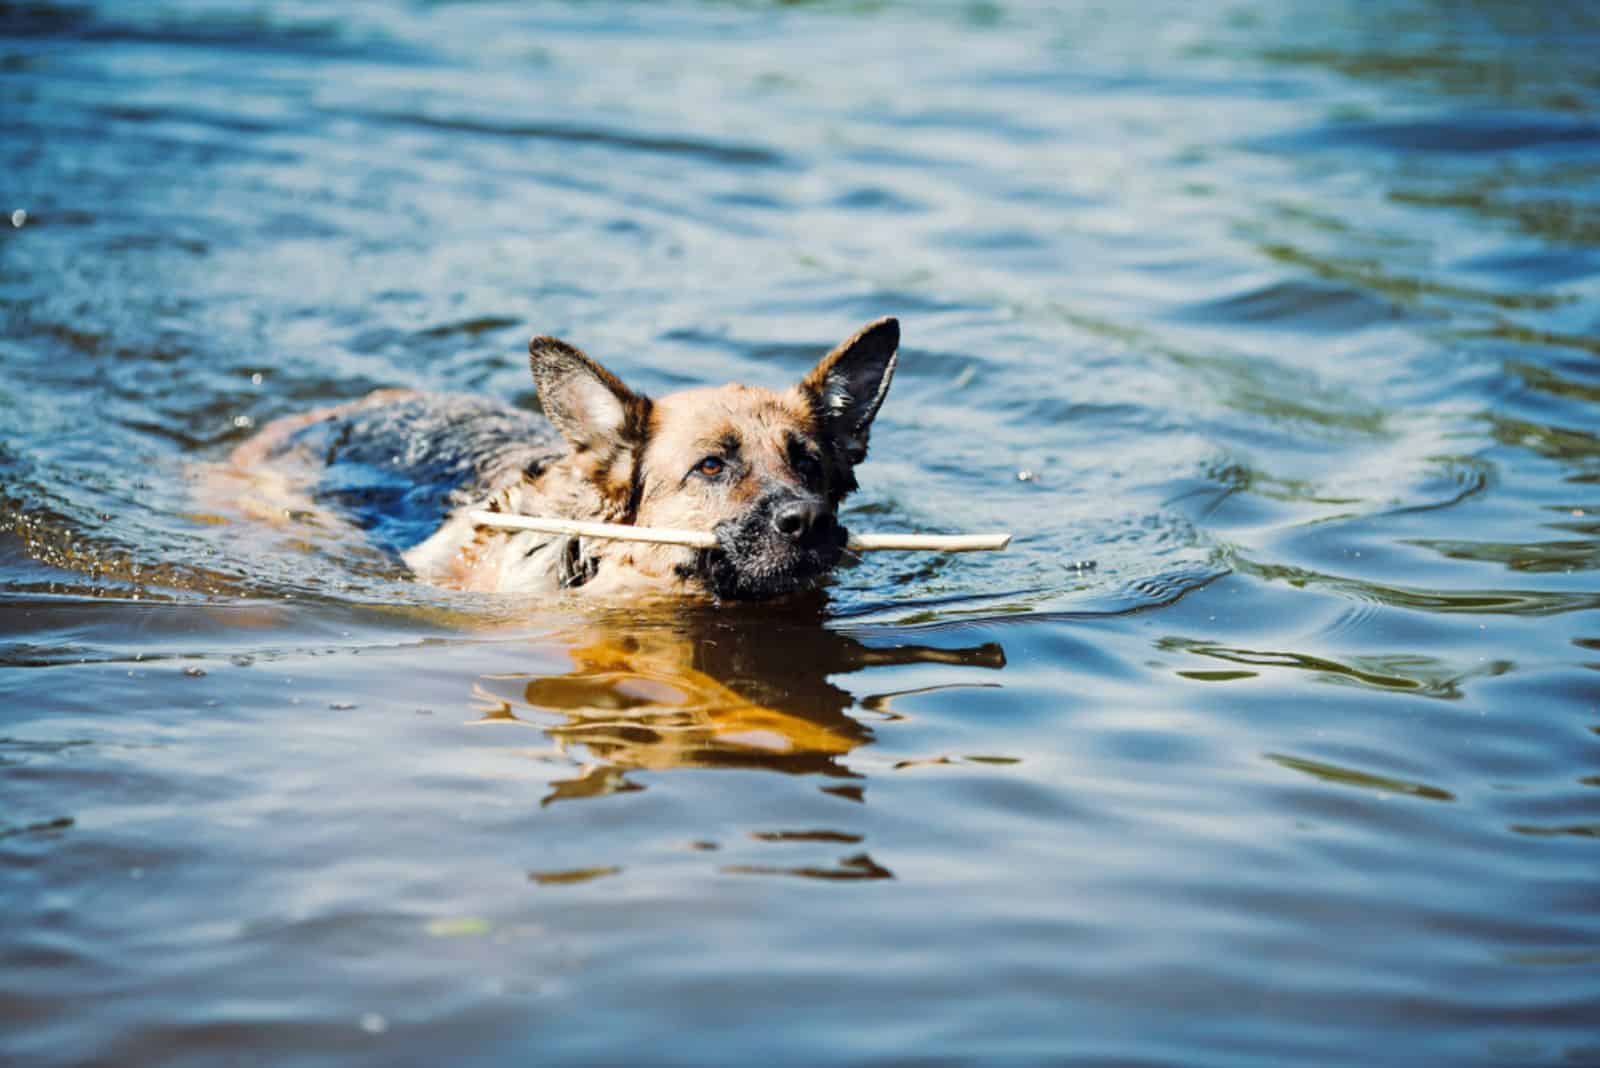 german shepherd swims in the water with a stick in his teeth